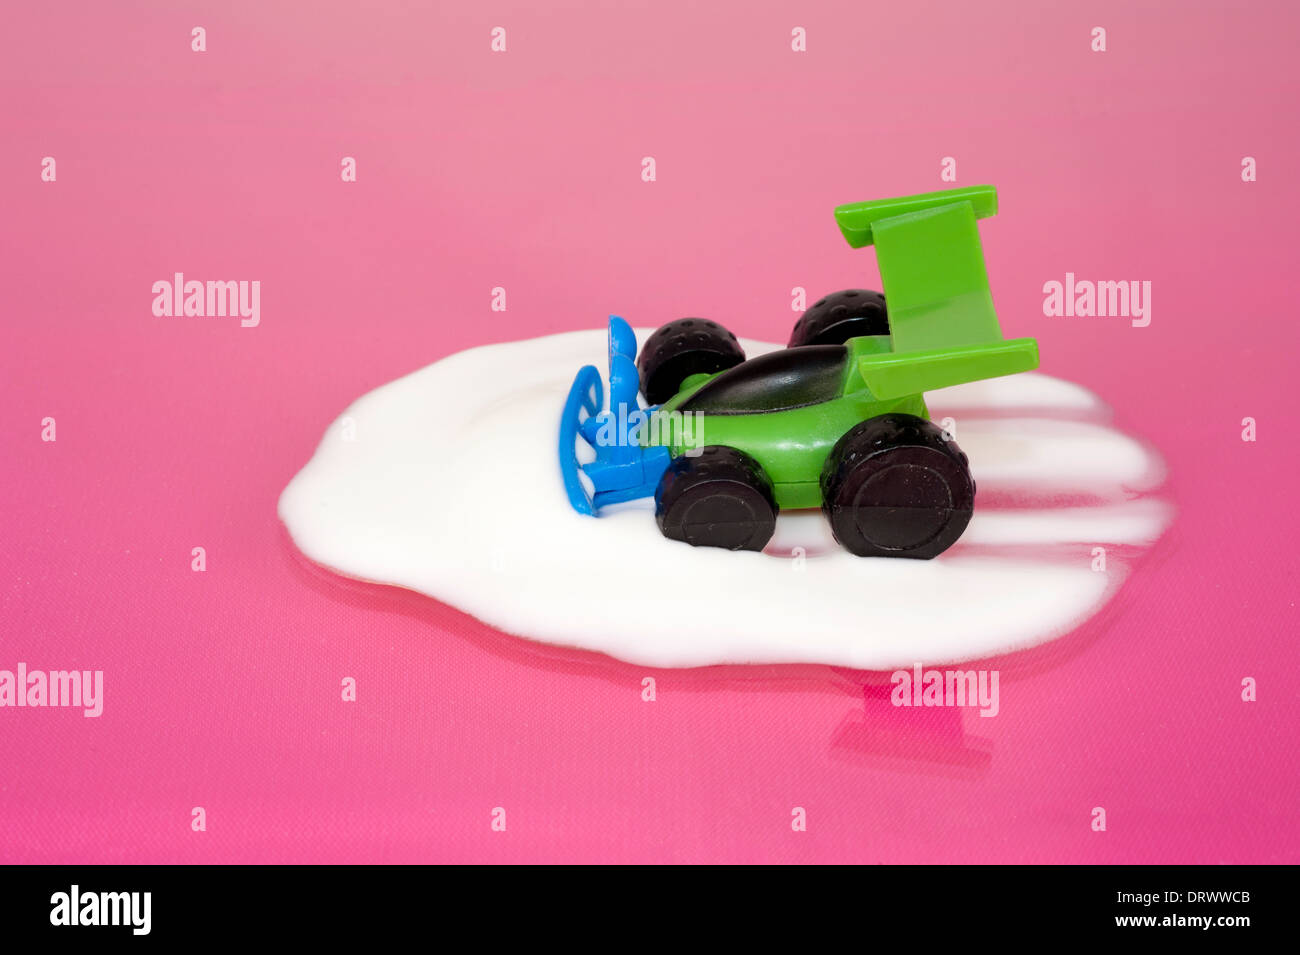 Toy car driving into pool of yogurt on a pink surface Stock Photo